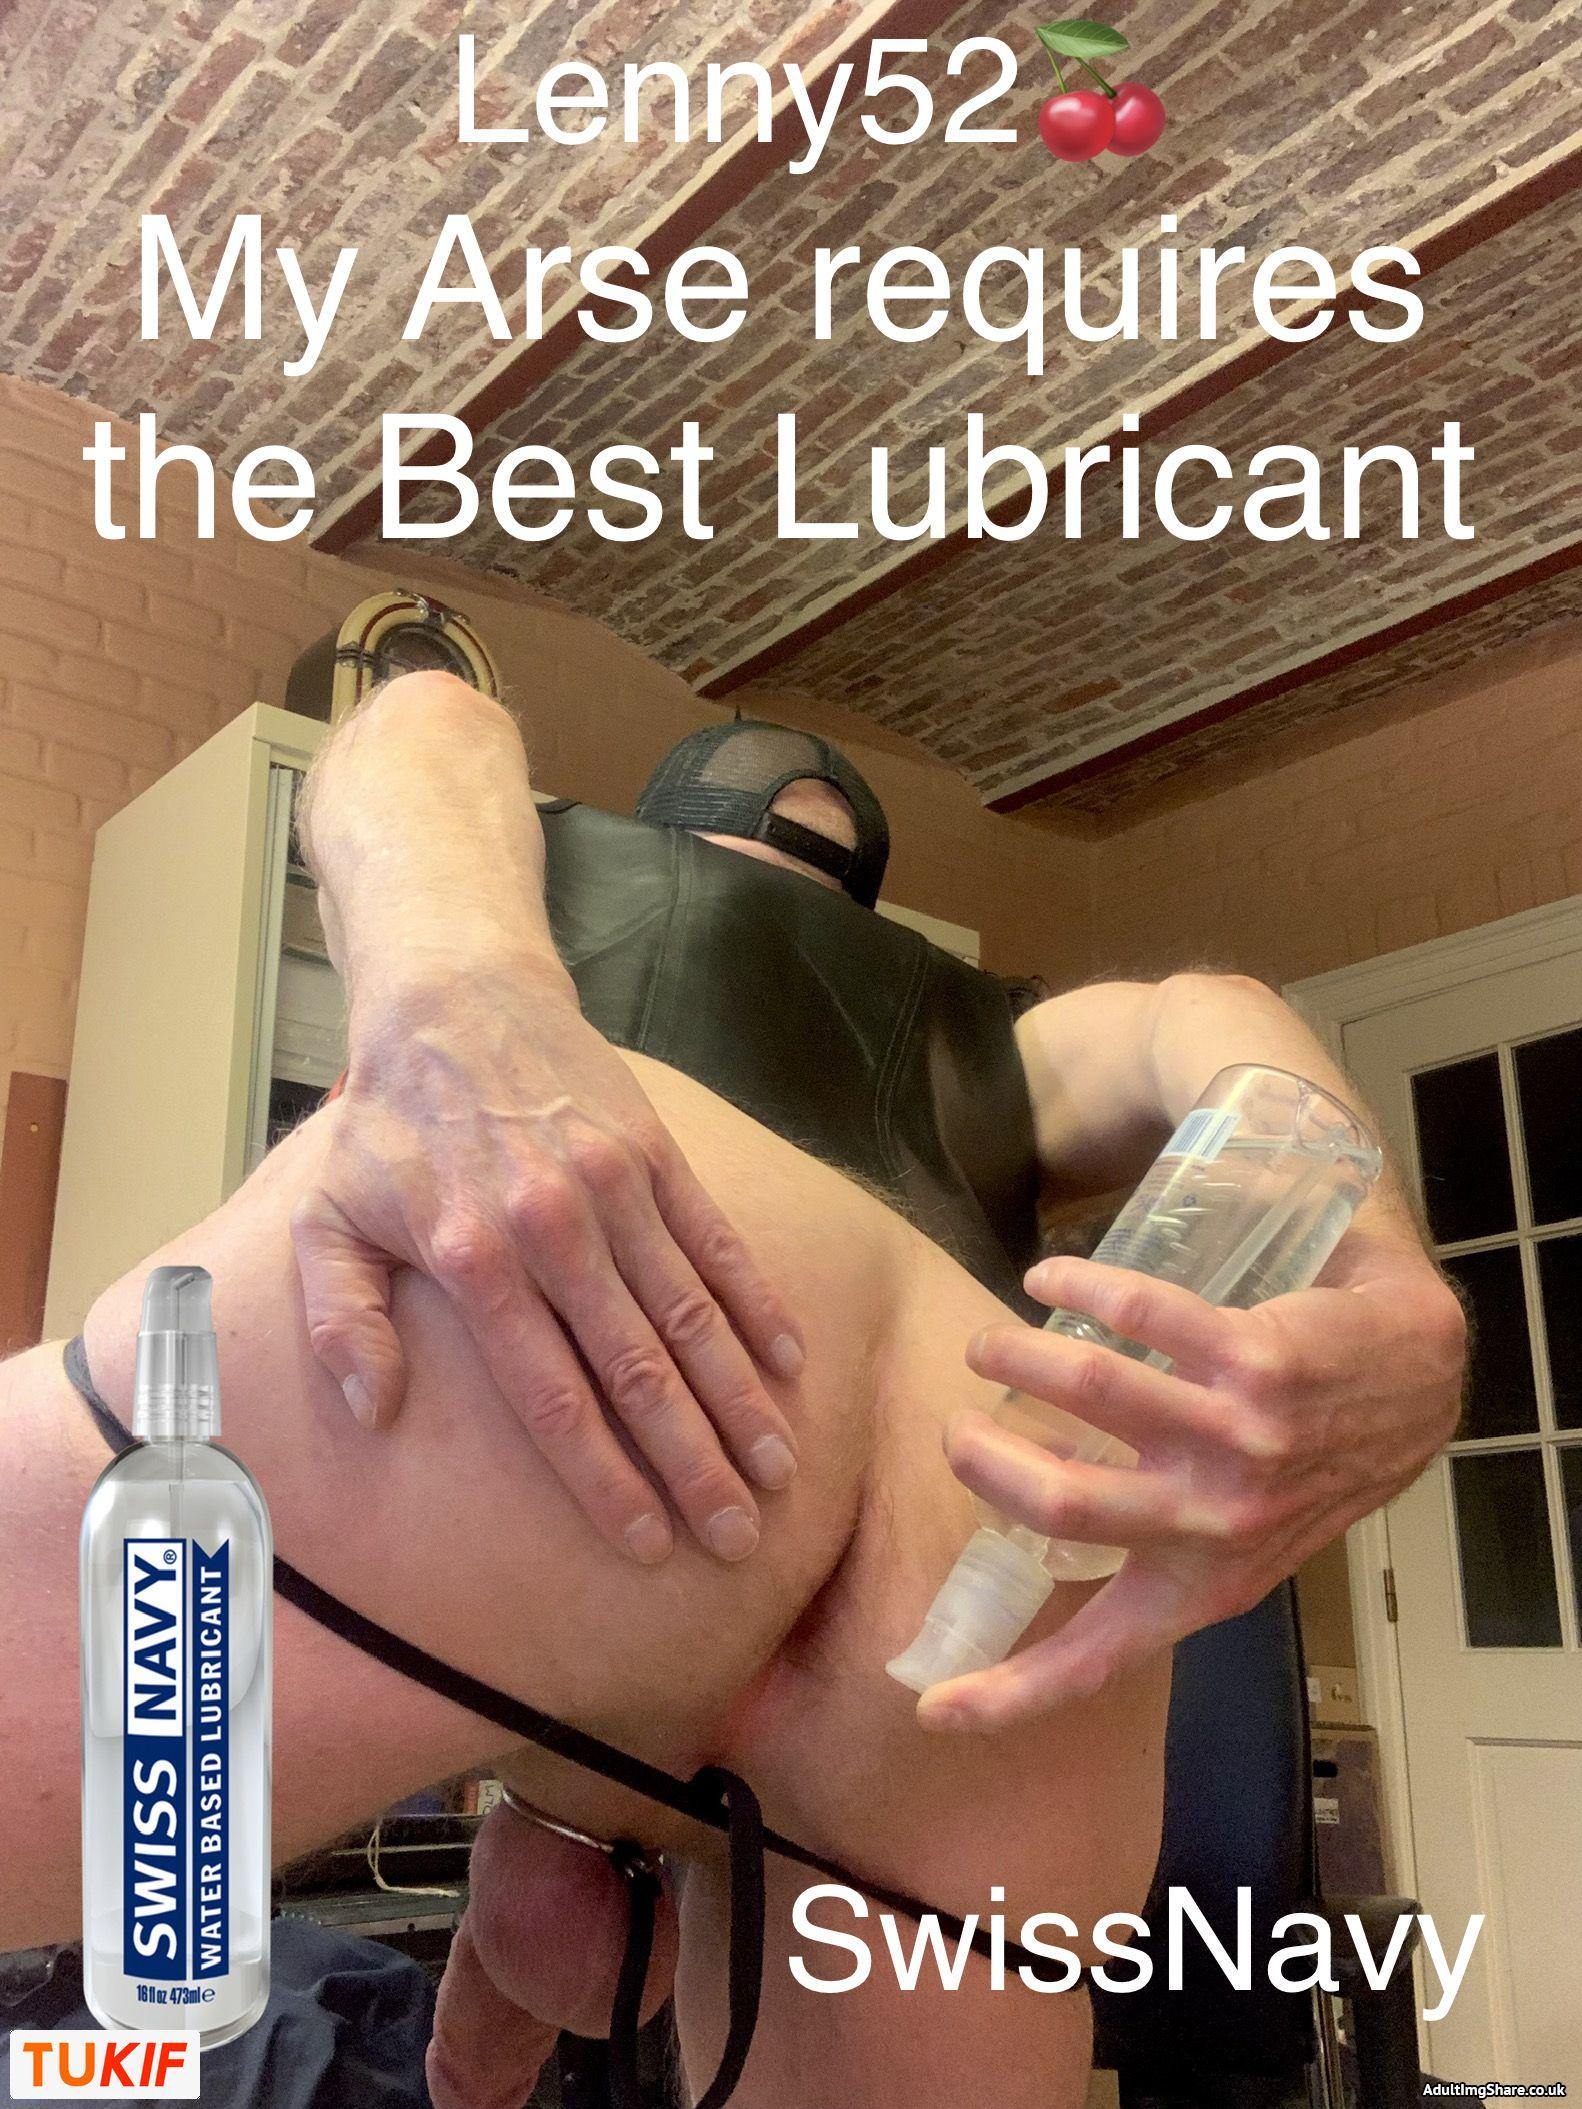 I need lube... says Lenny52... the best brand only